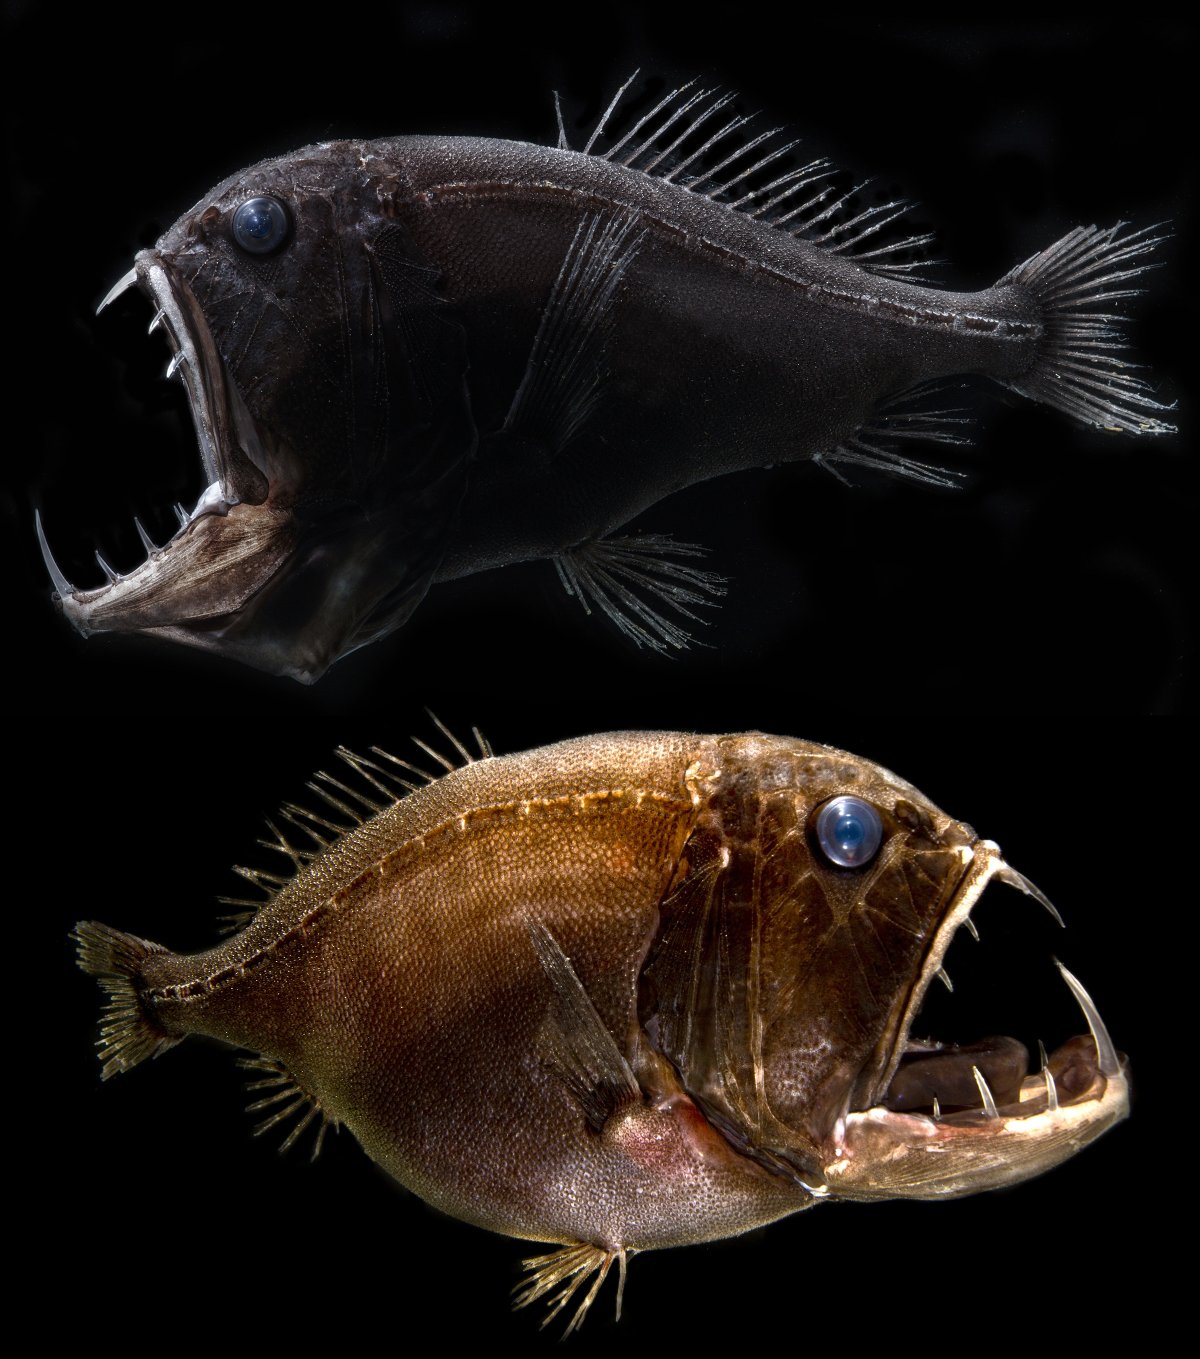 A composite image showing two fangtooth fish